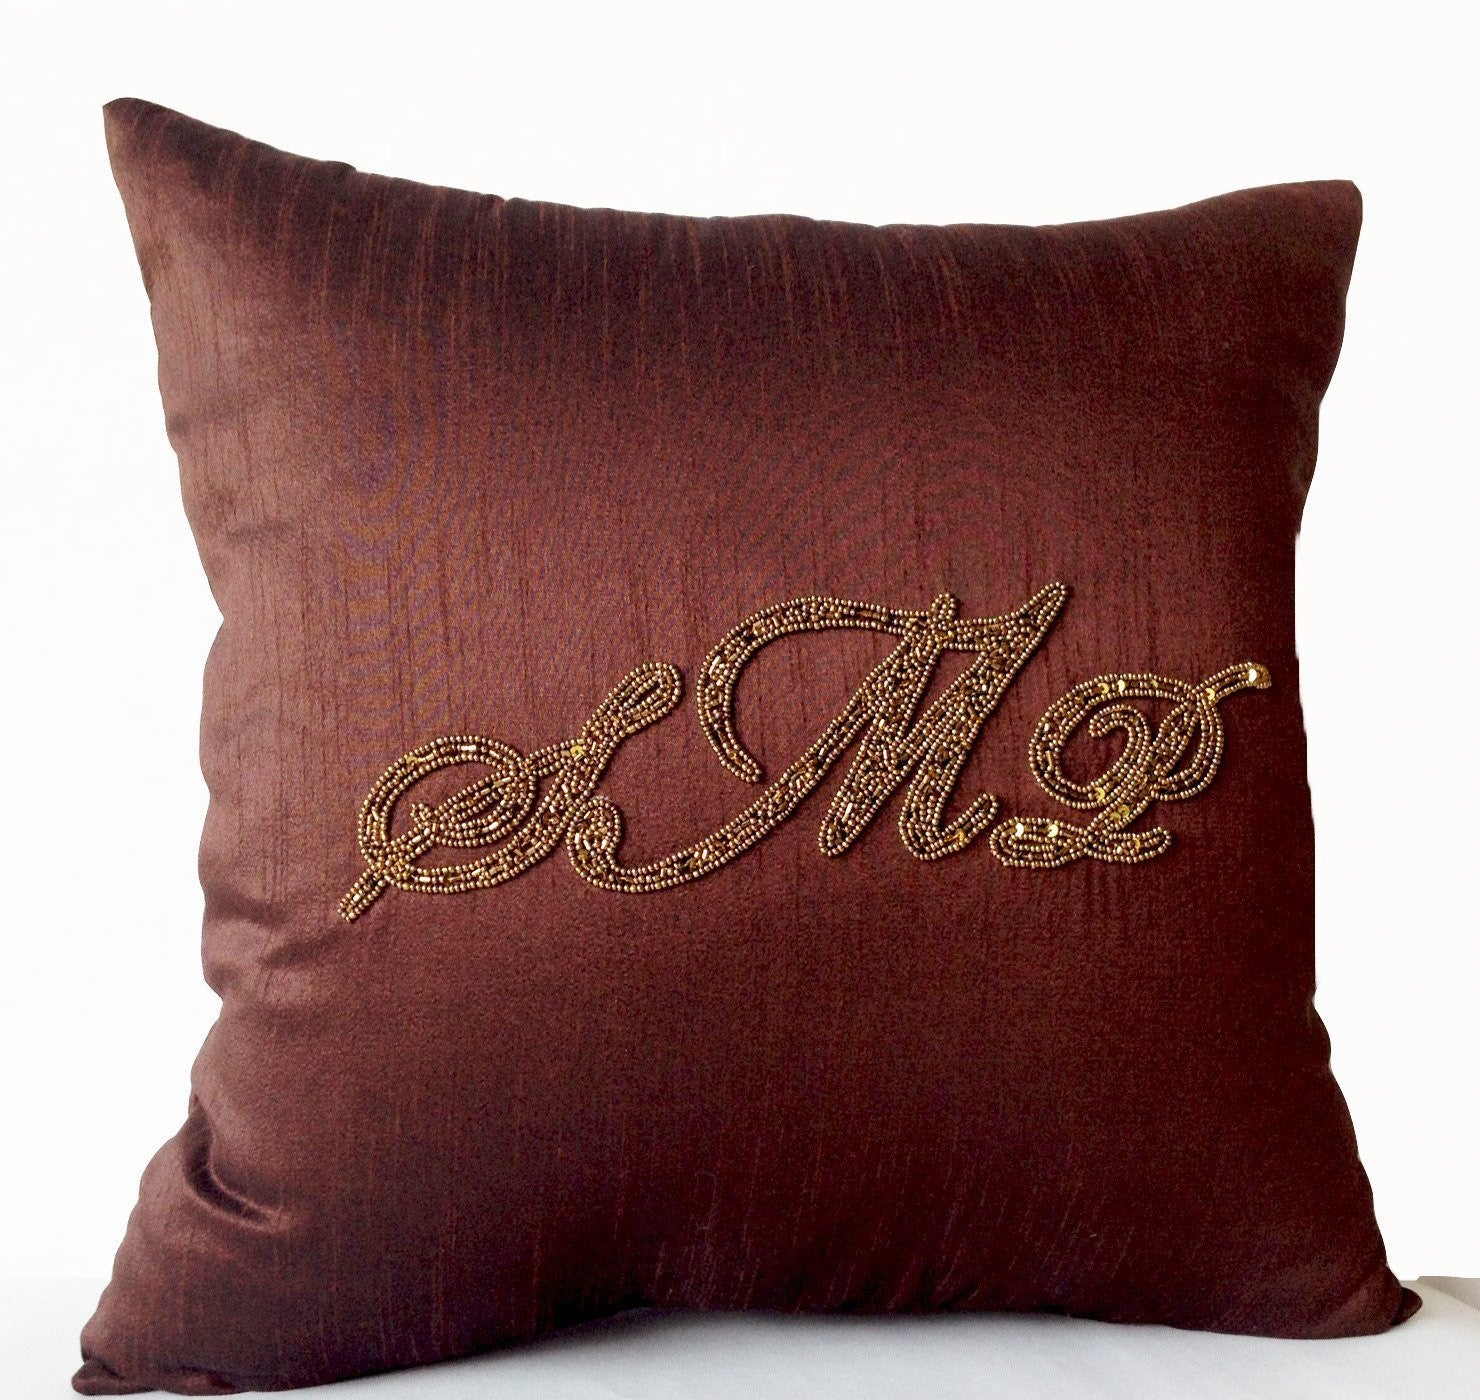 Handmade, customized monogrammed brown throw pillow covers with embroidery